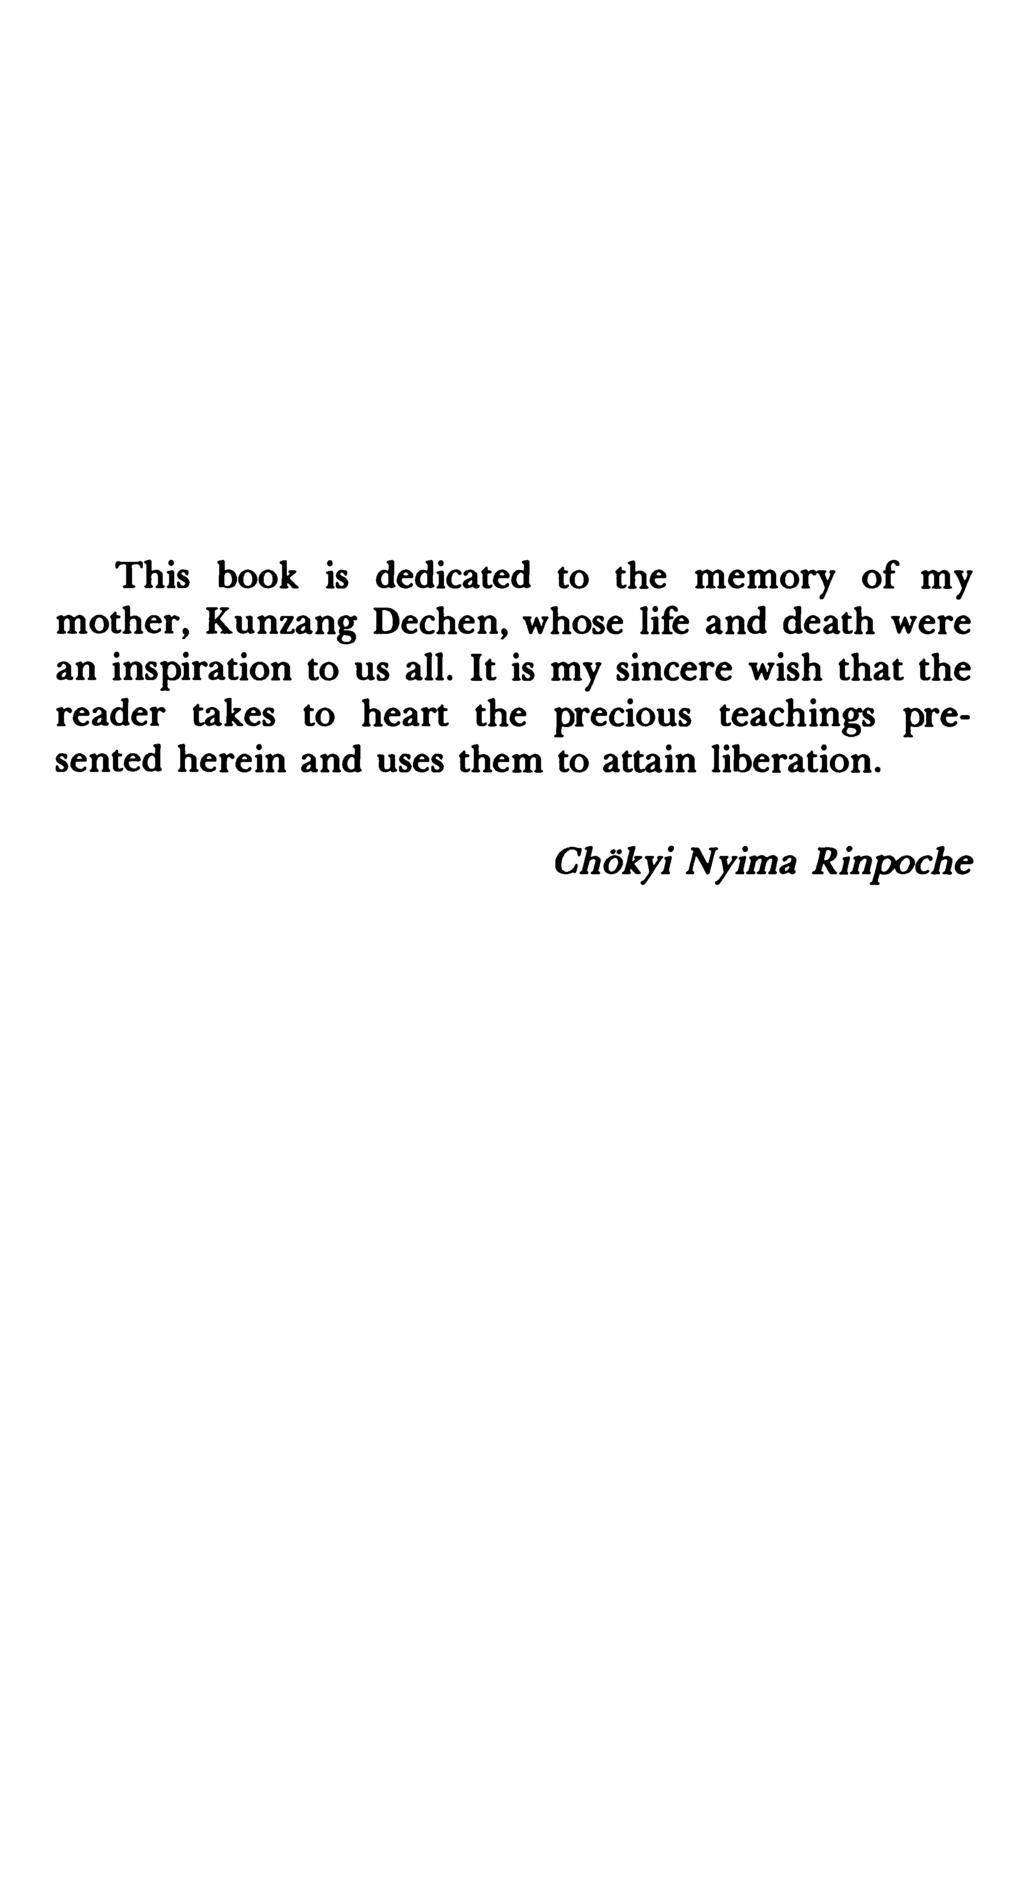 This book is dedicated to the memory of my mother, Kunzang Dechen, whose life and death were an inspiration to us all.